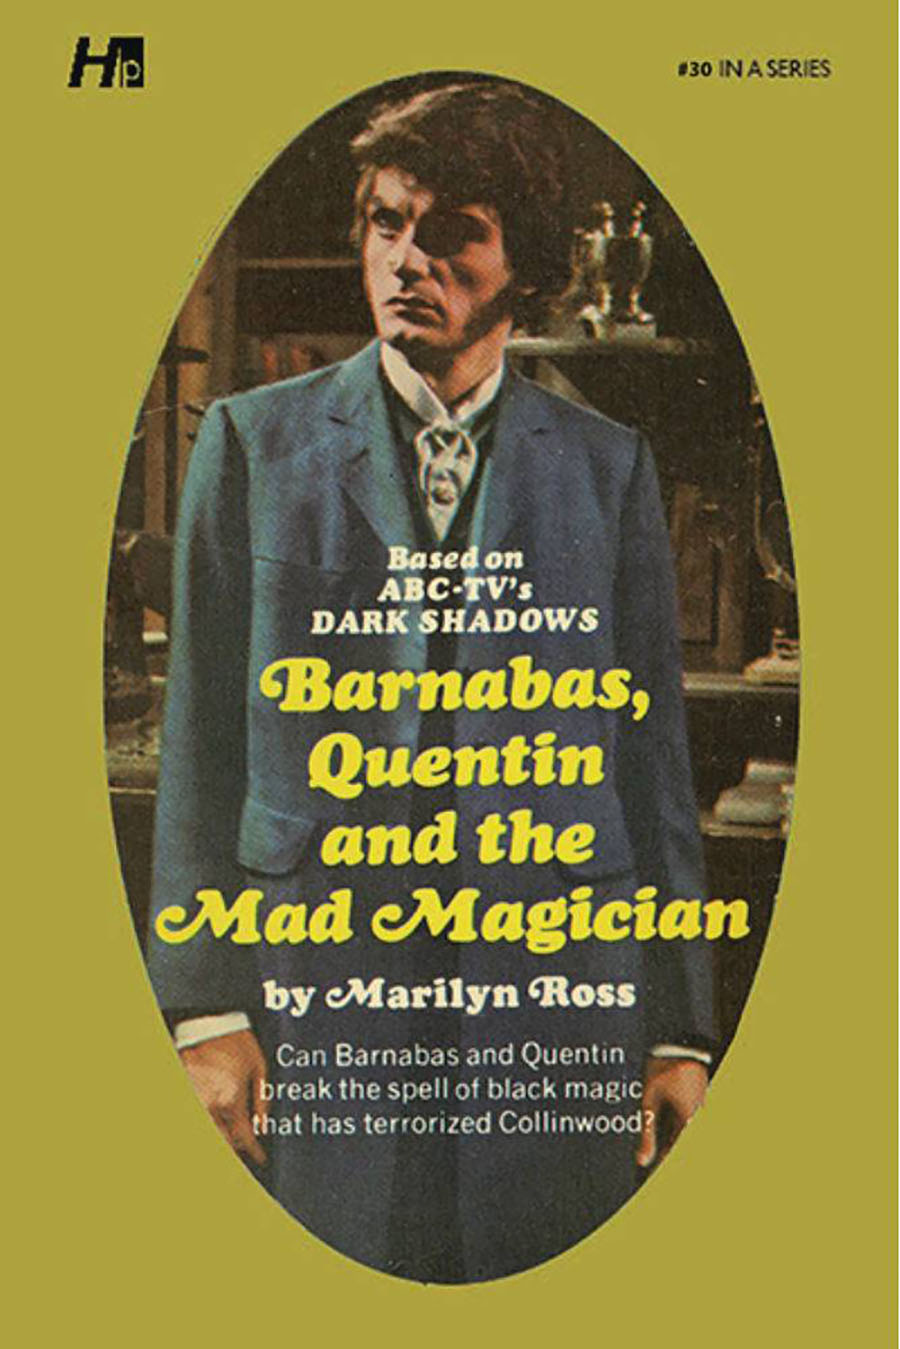 Dark Shadows Paperback Library Novel Vol 30 Barnabas Quentin And The Mad Magician TP